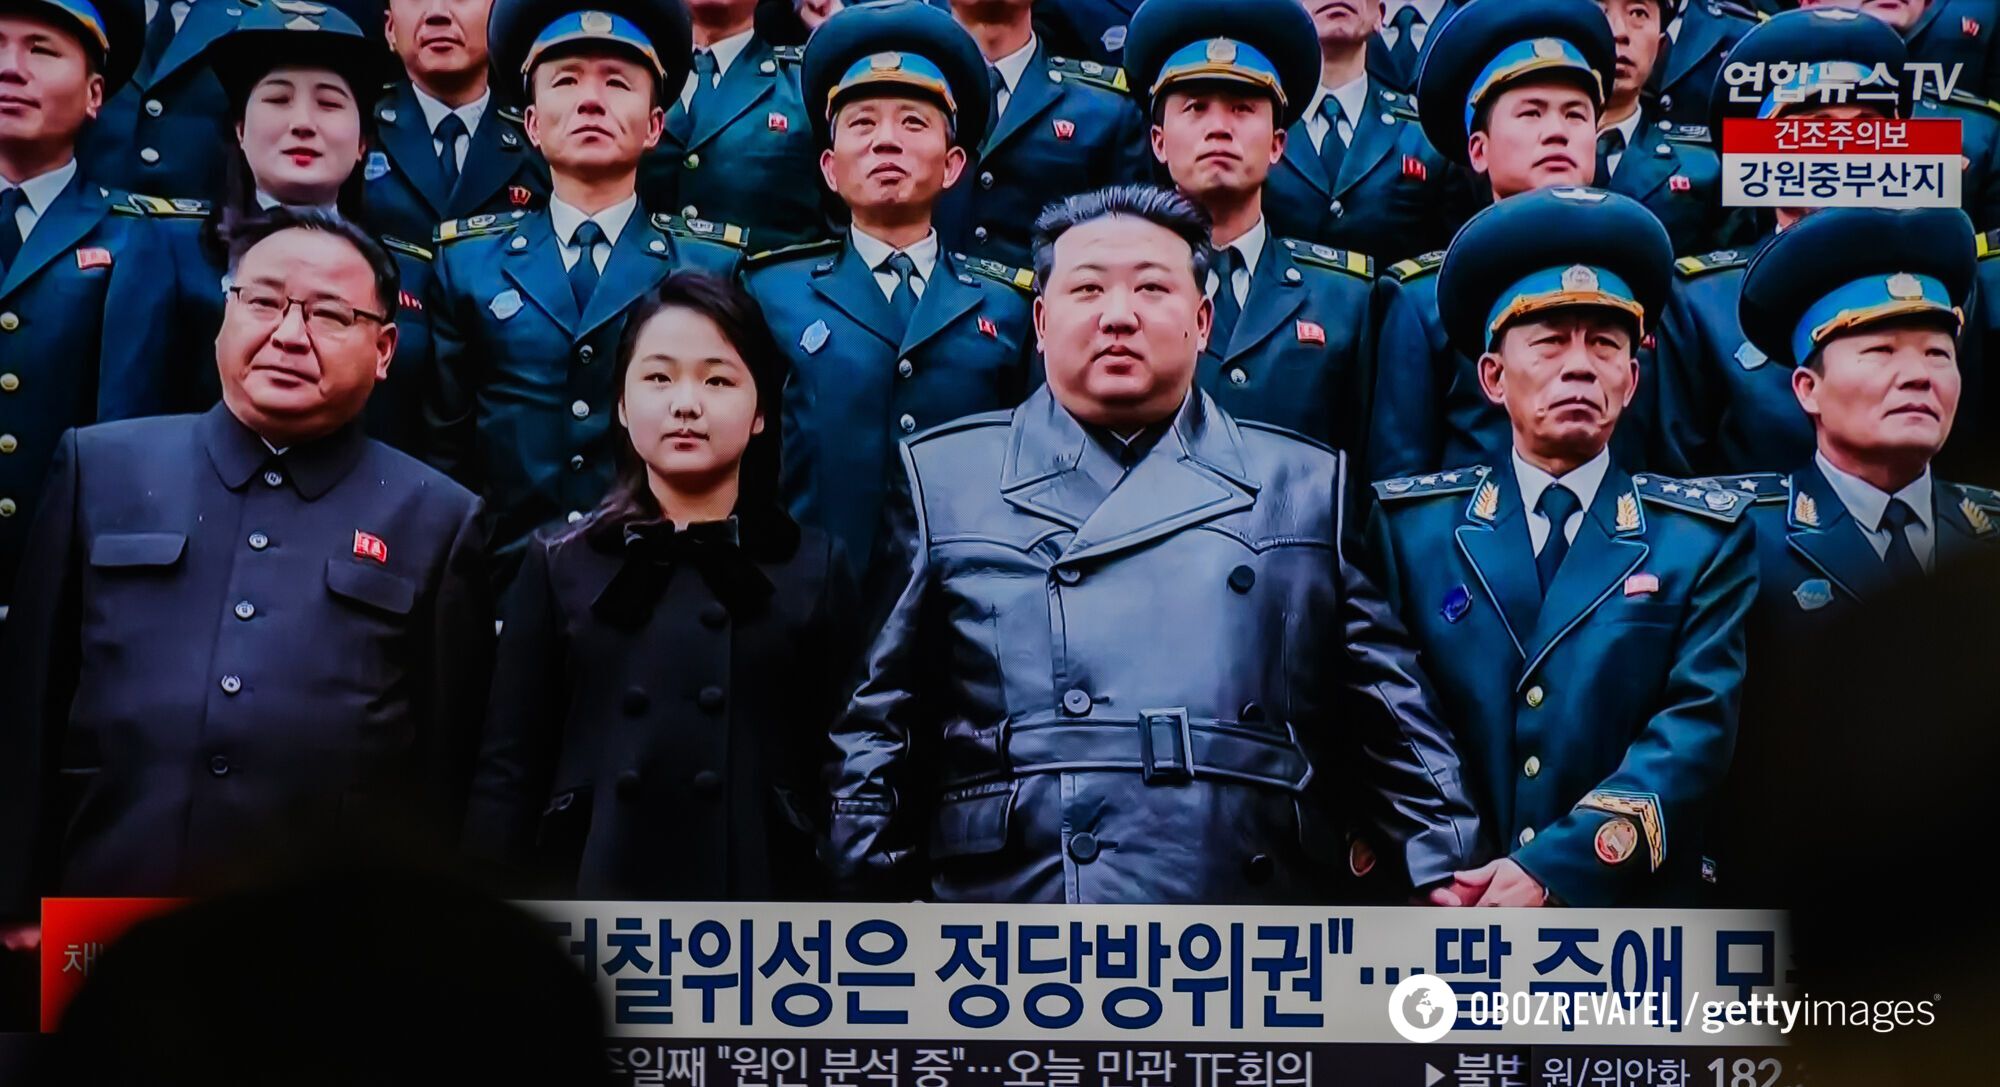 Kim Jong-un's daughter may become the new leader of North Korea: her clothes convey eloquent messages. Photos